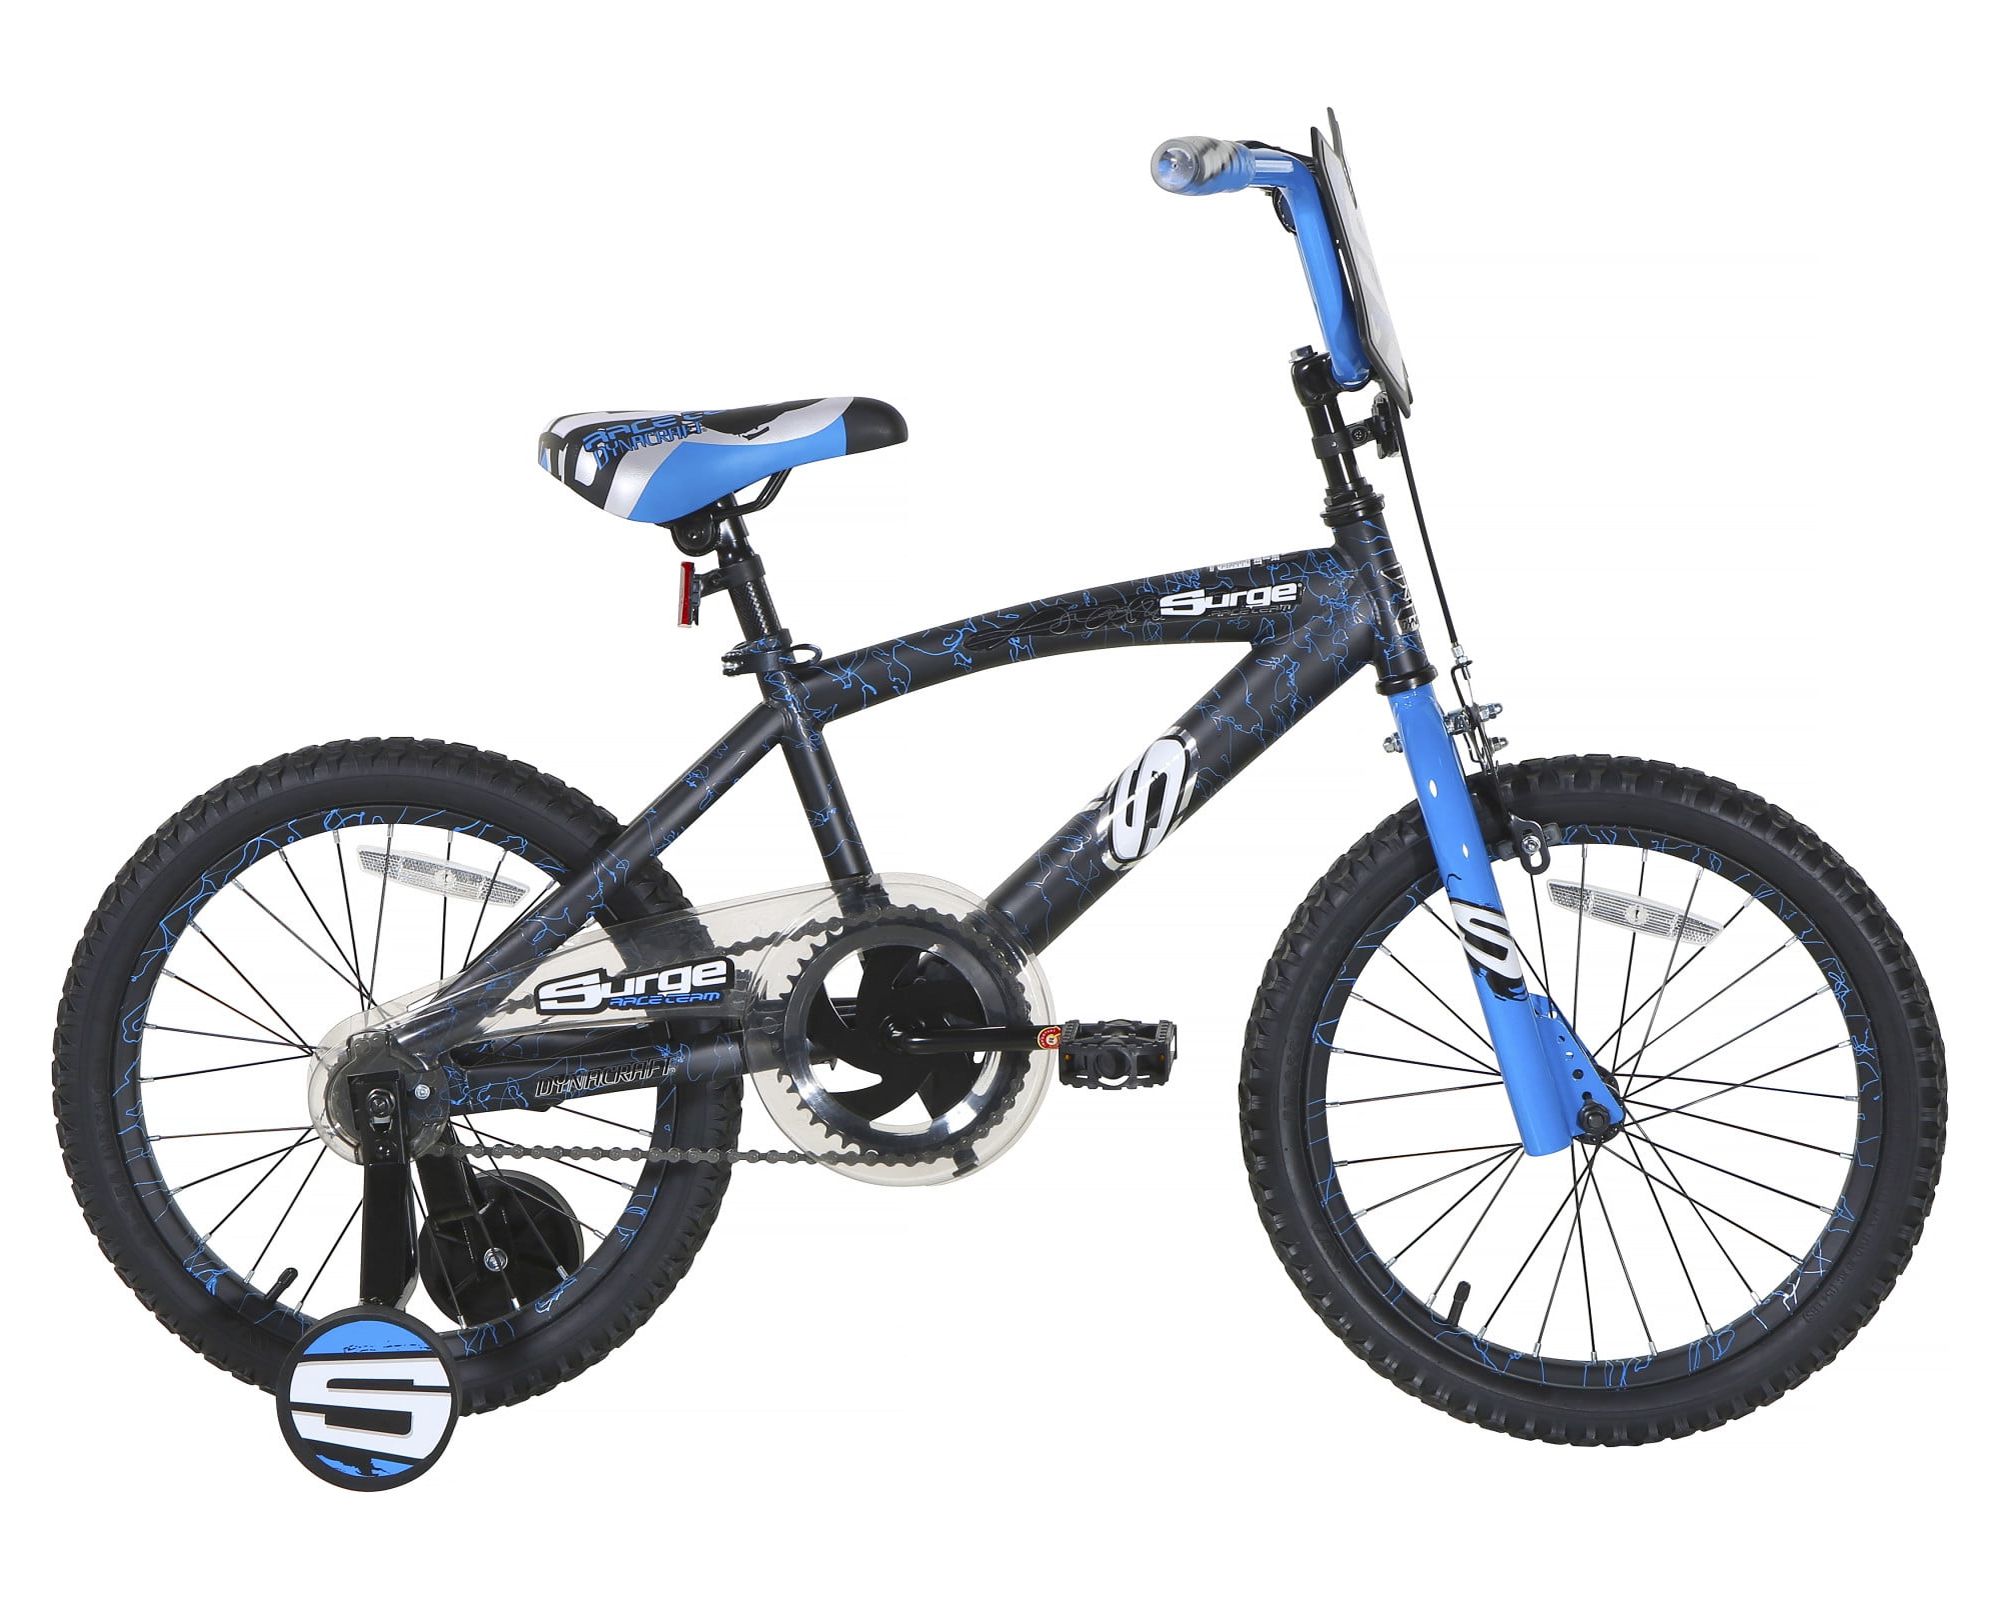 Dynacraft Surge18-inch Boys BMX Bike for Age 6-9 Years - image 2 of 11